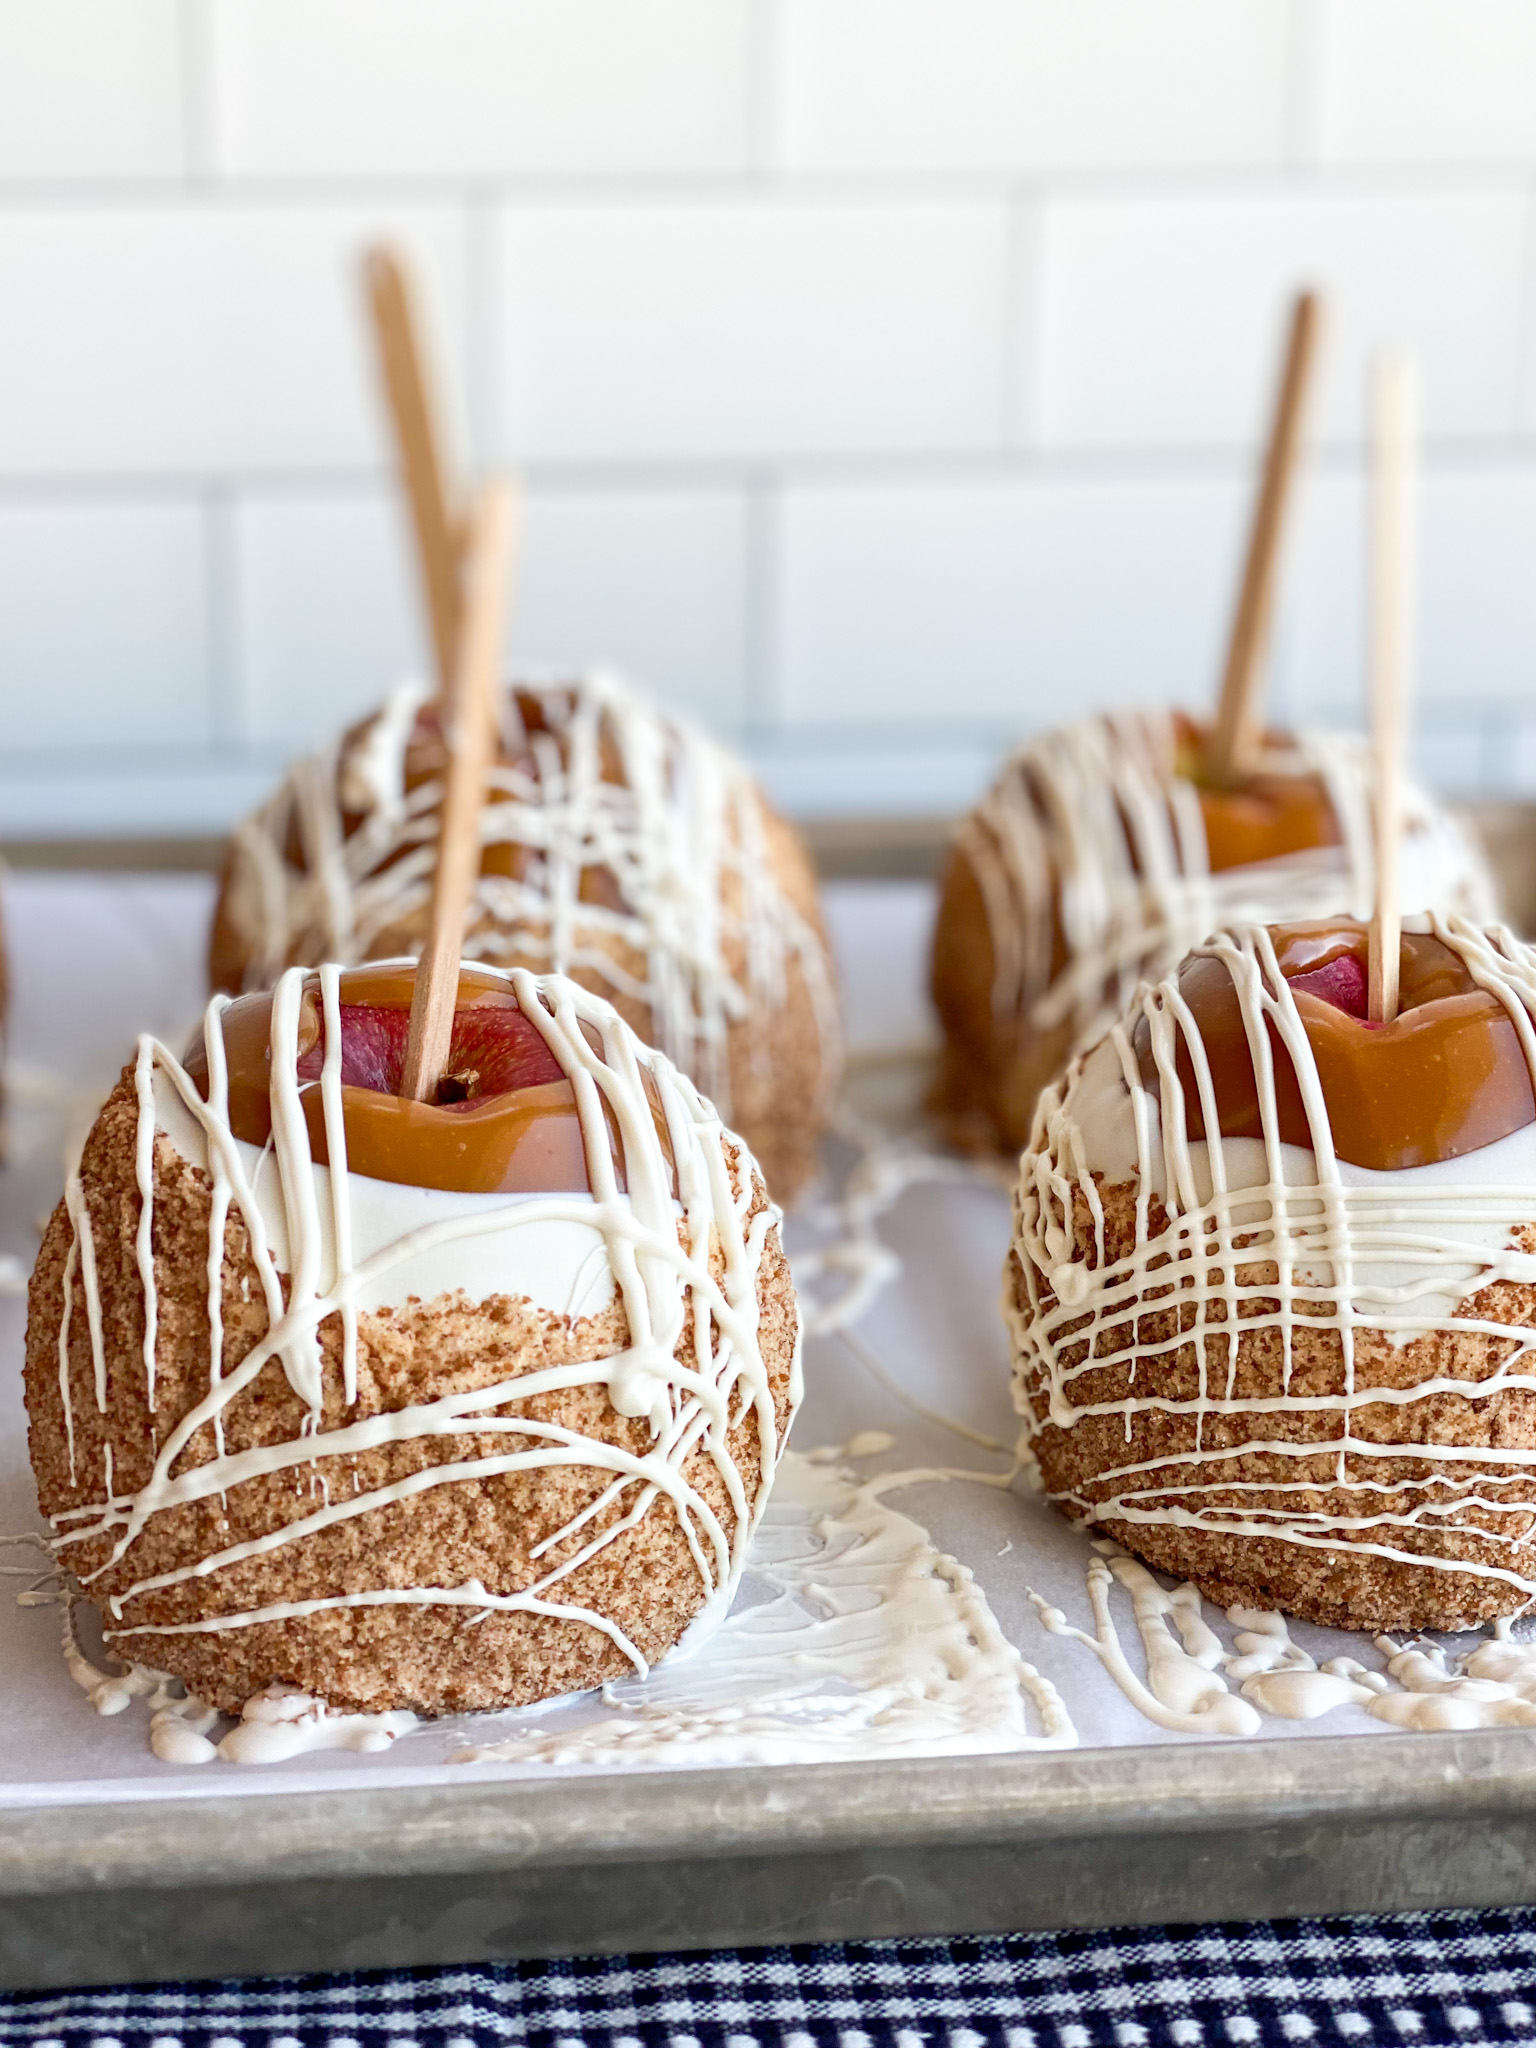 Candy Apple Sticks are used for caramel or candy apples and even